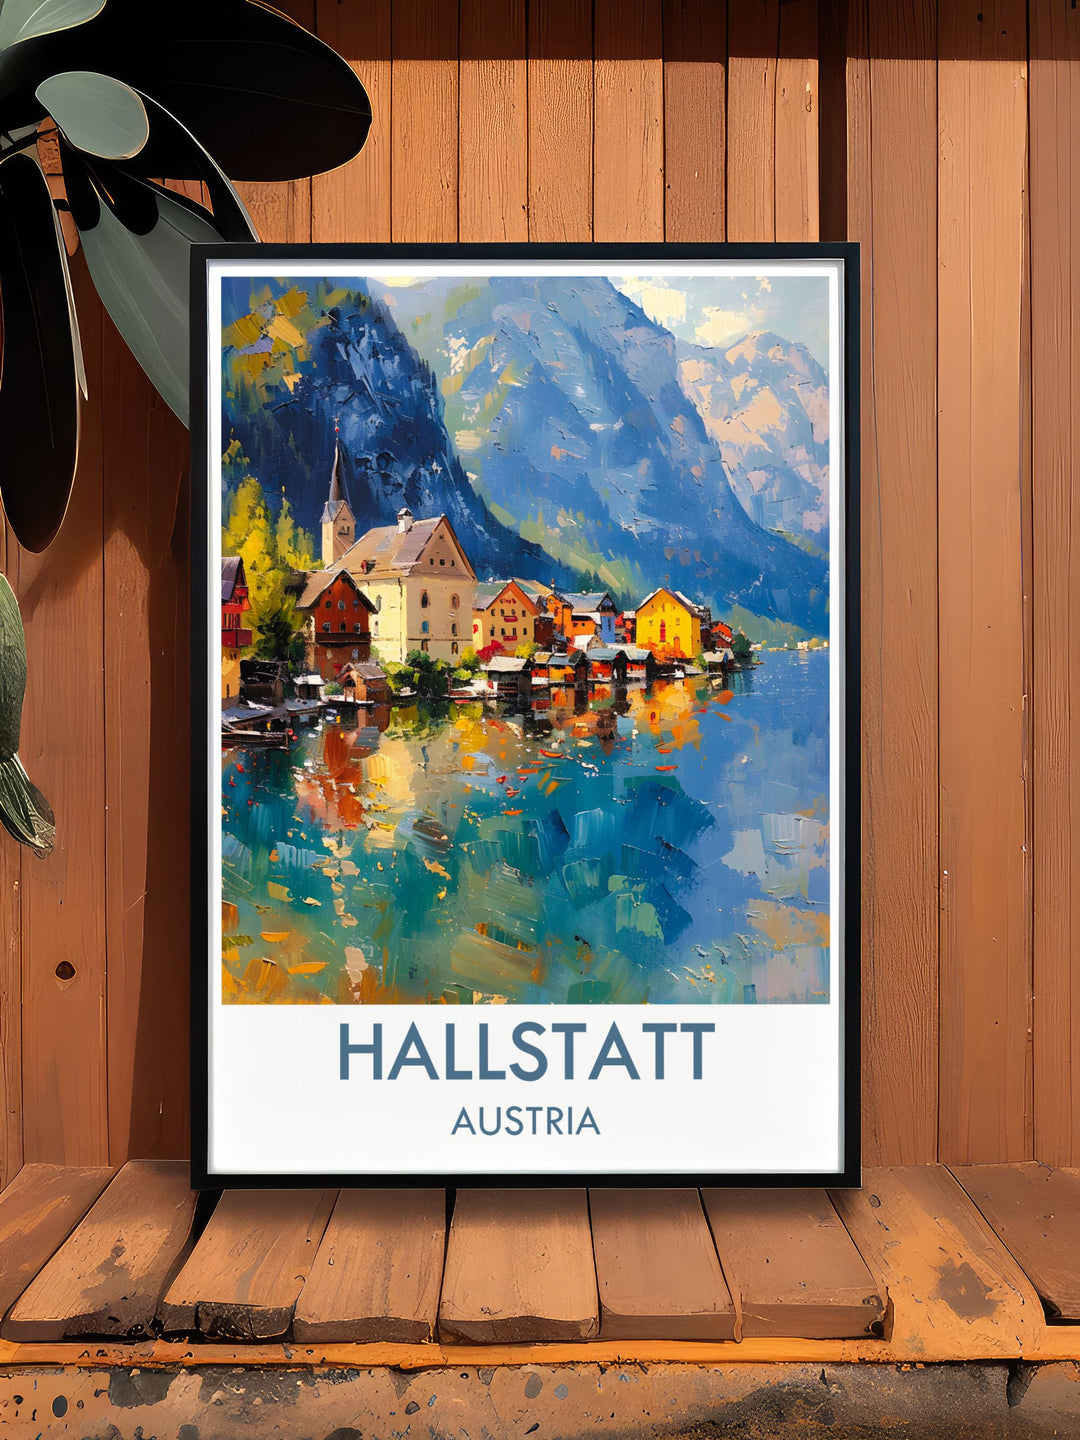 Featuring the charming Hallstatt Village, this art print highlights the serene streets, iconic church, and stunning lake views, perfect for home decor.